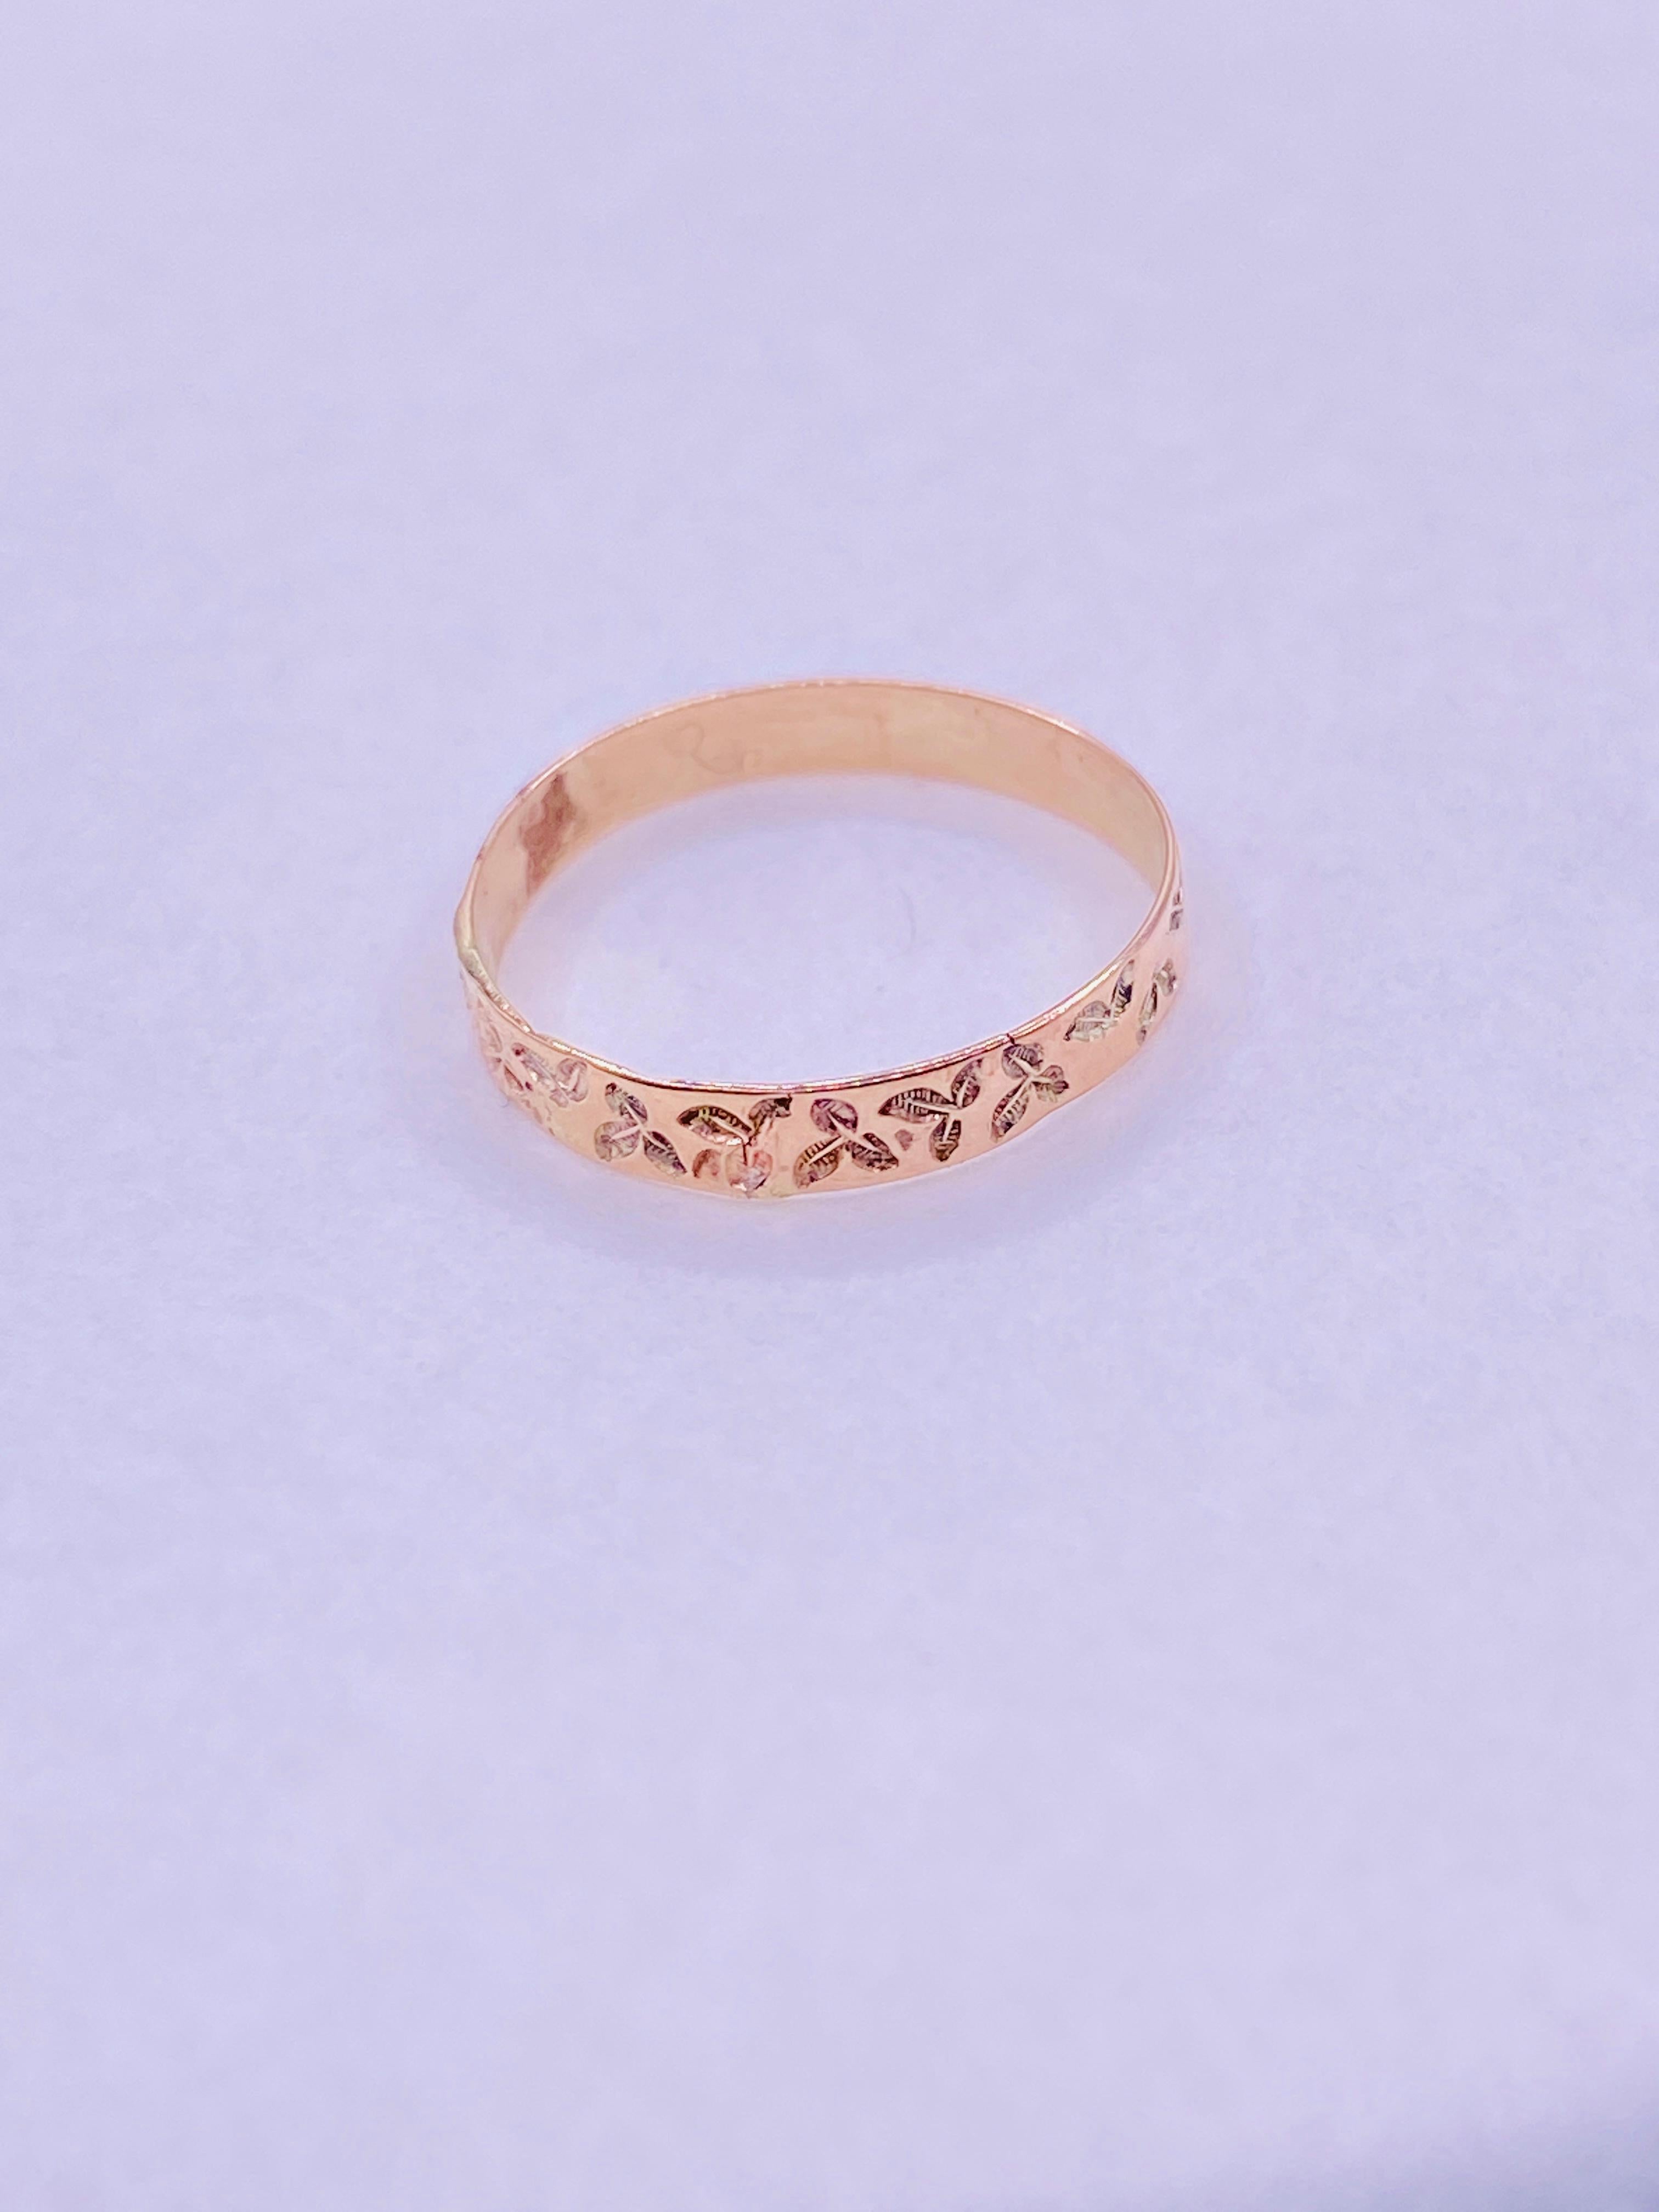 Victorian Antique Infant Baby Gold Band Ring For Sale